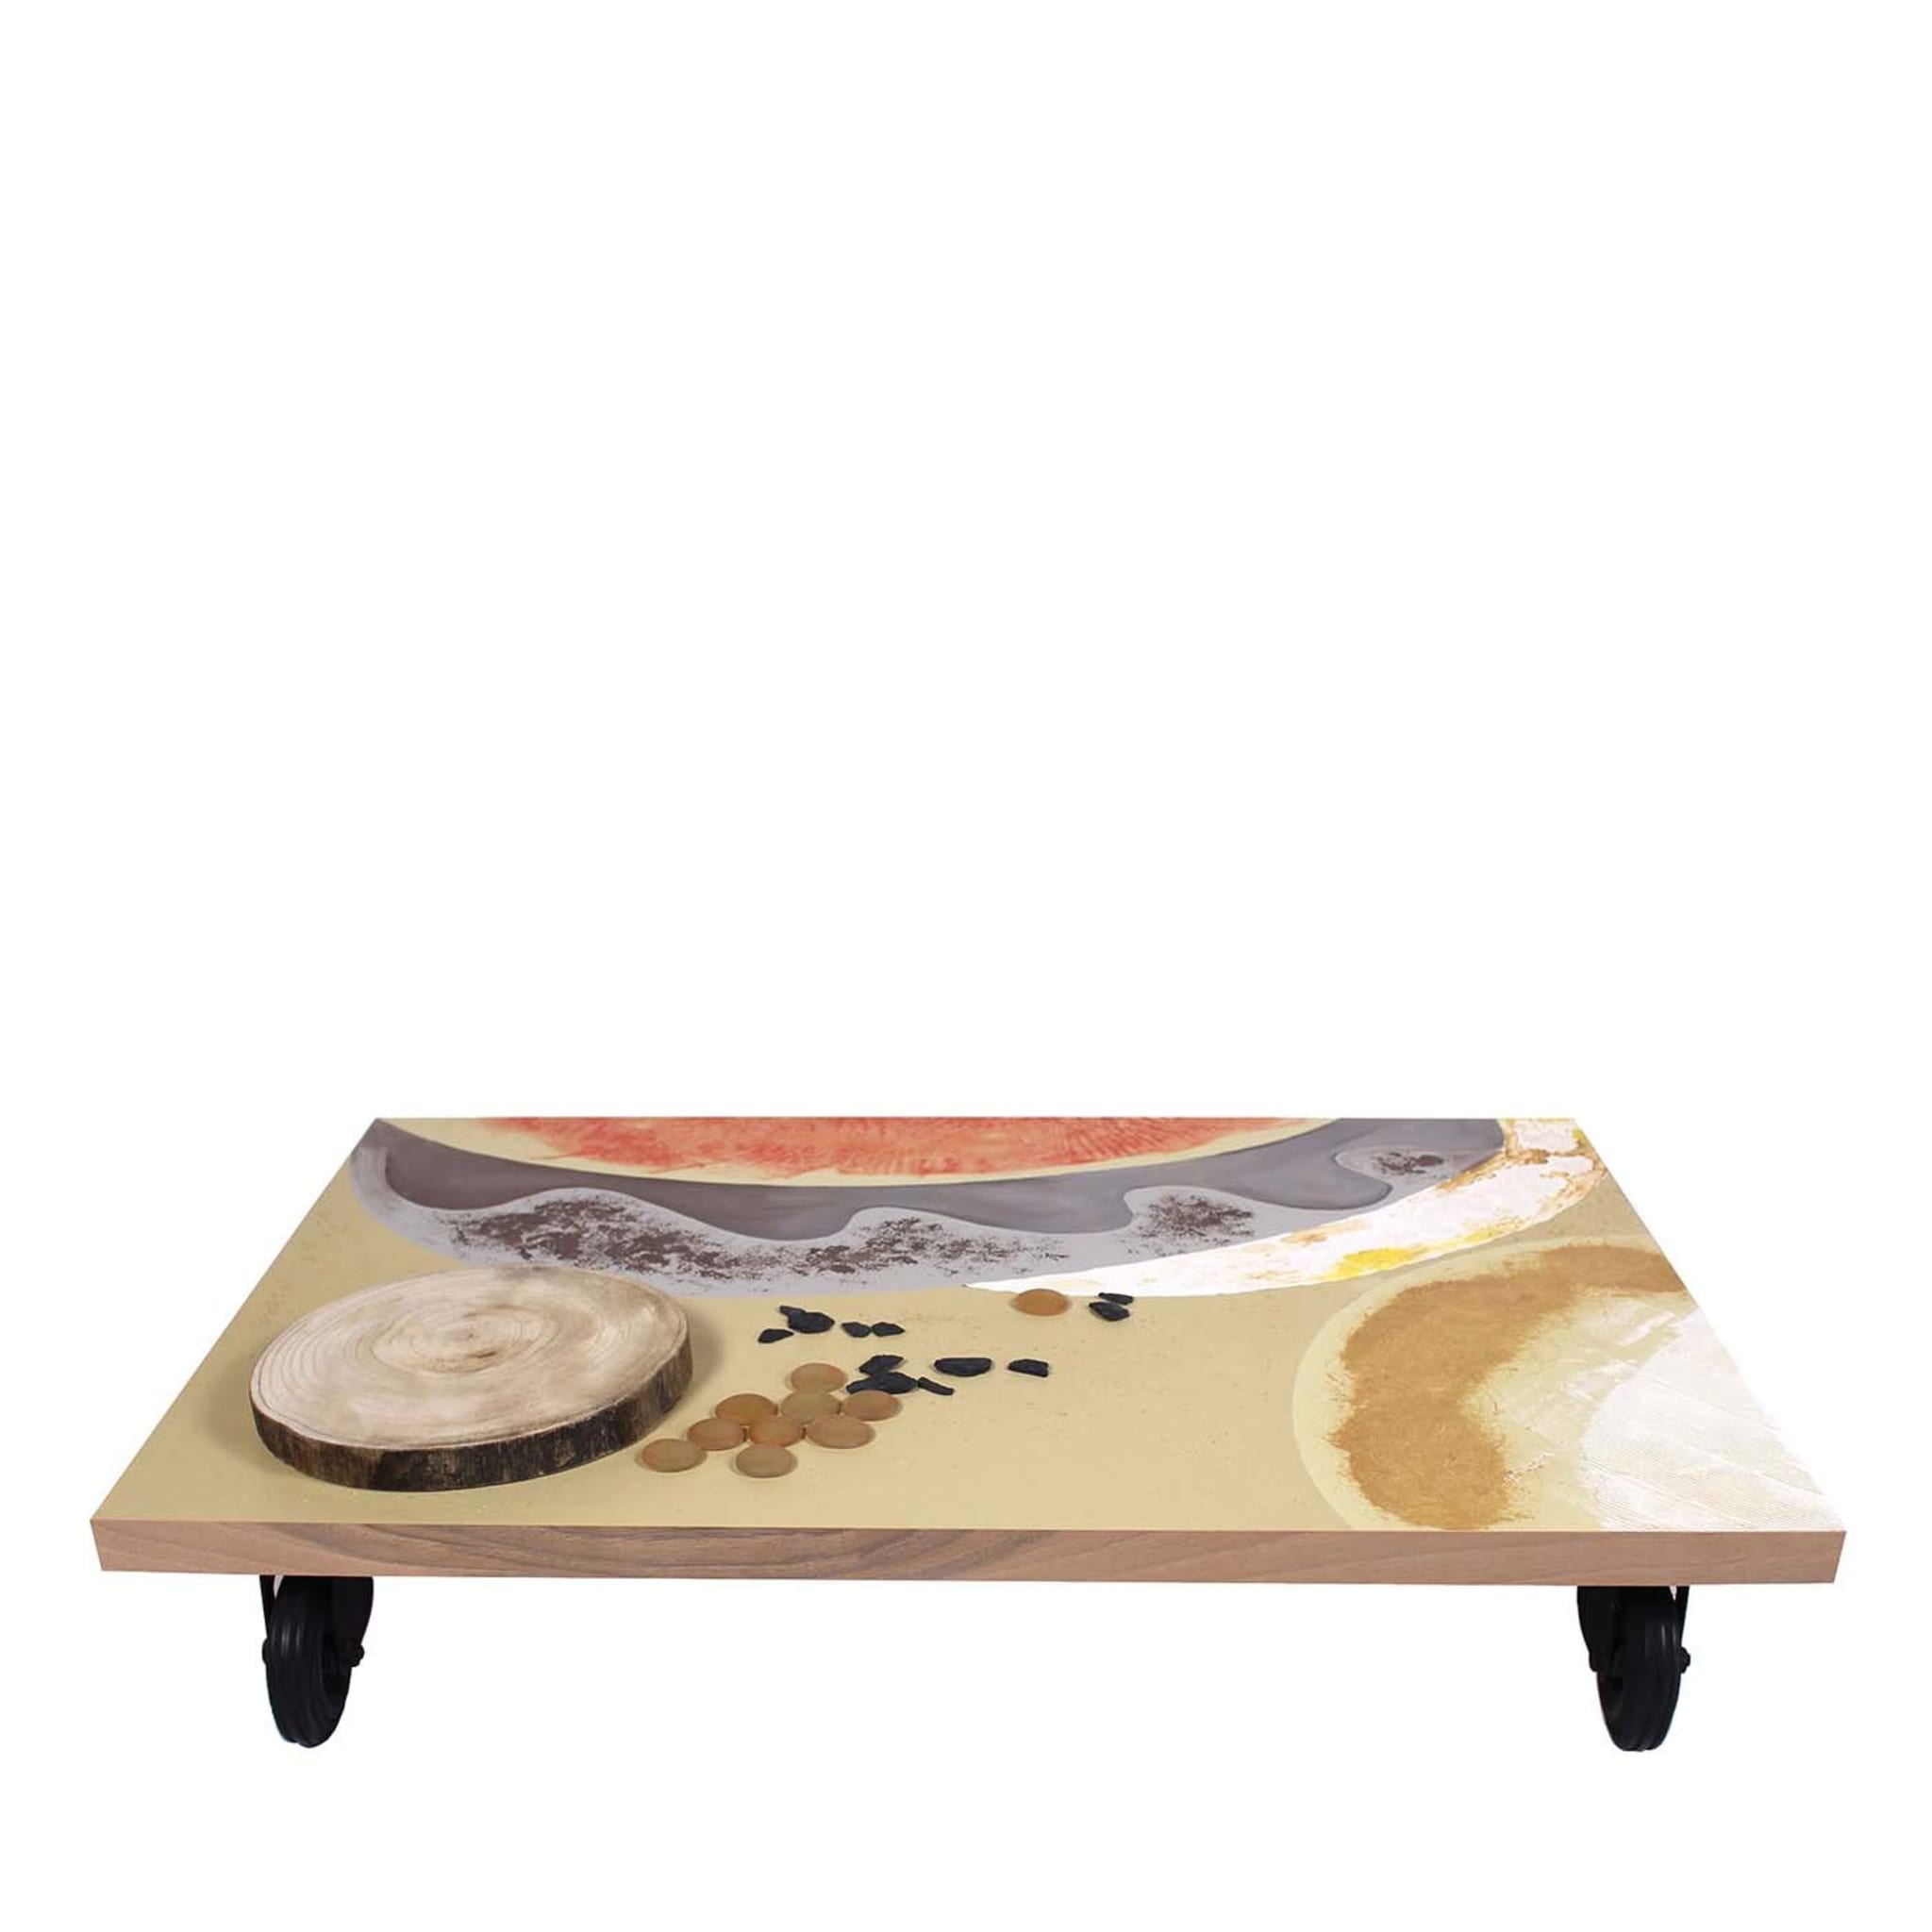 Gombo Due Coffee Table by Mascia Meccani - Main view